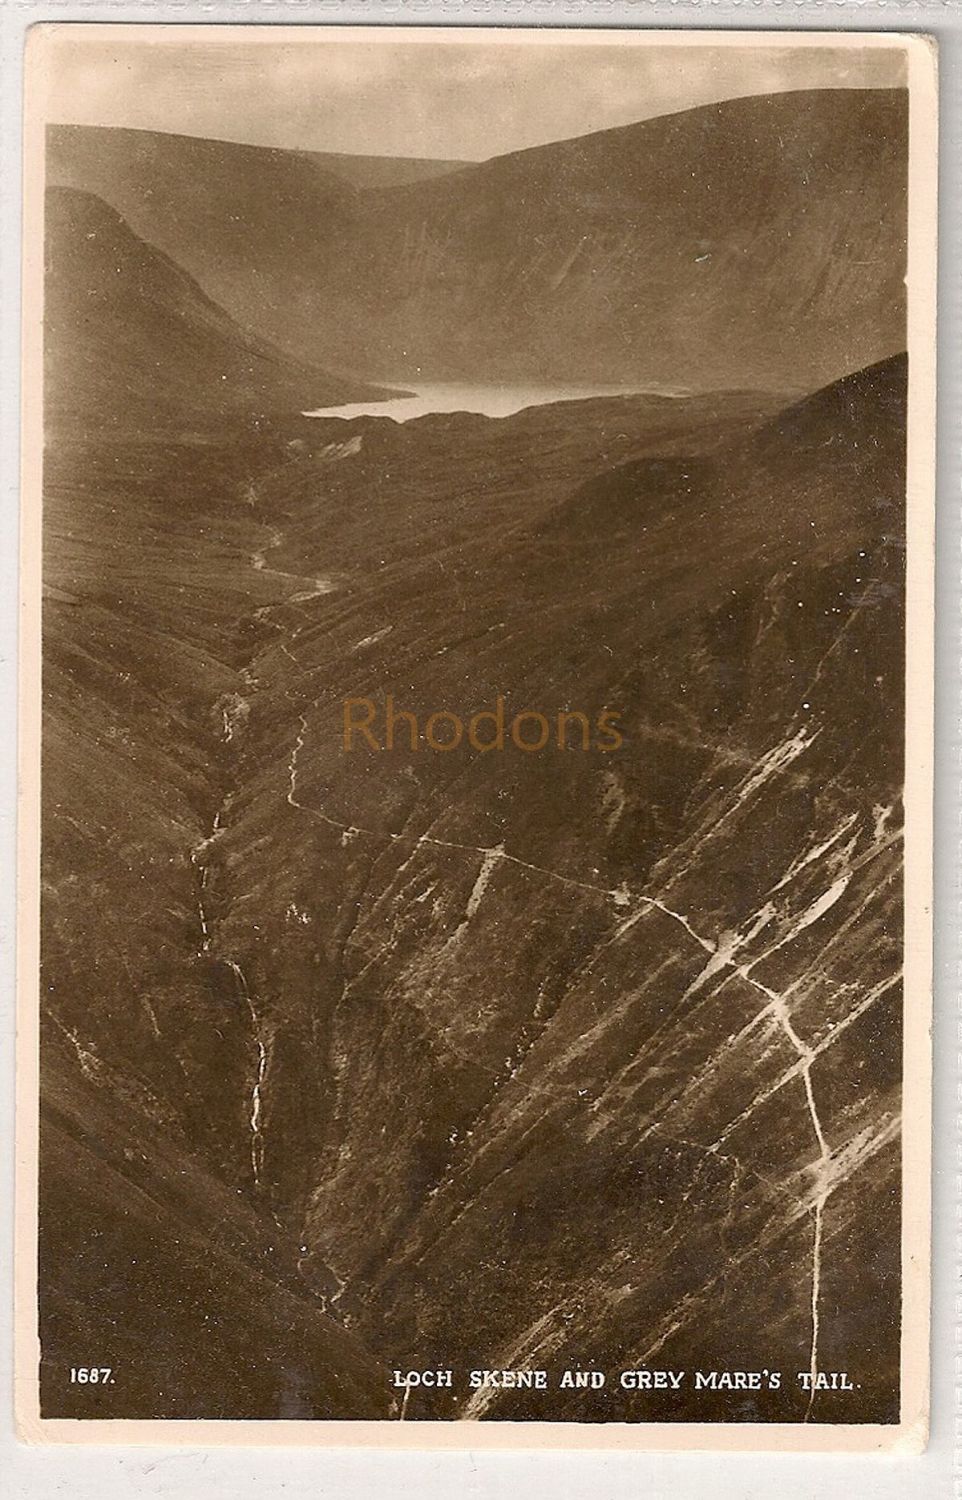 Scotland: Borders. Loch Skene And Grey Mares Tail. Real Photo Postcard